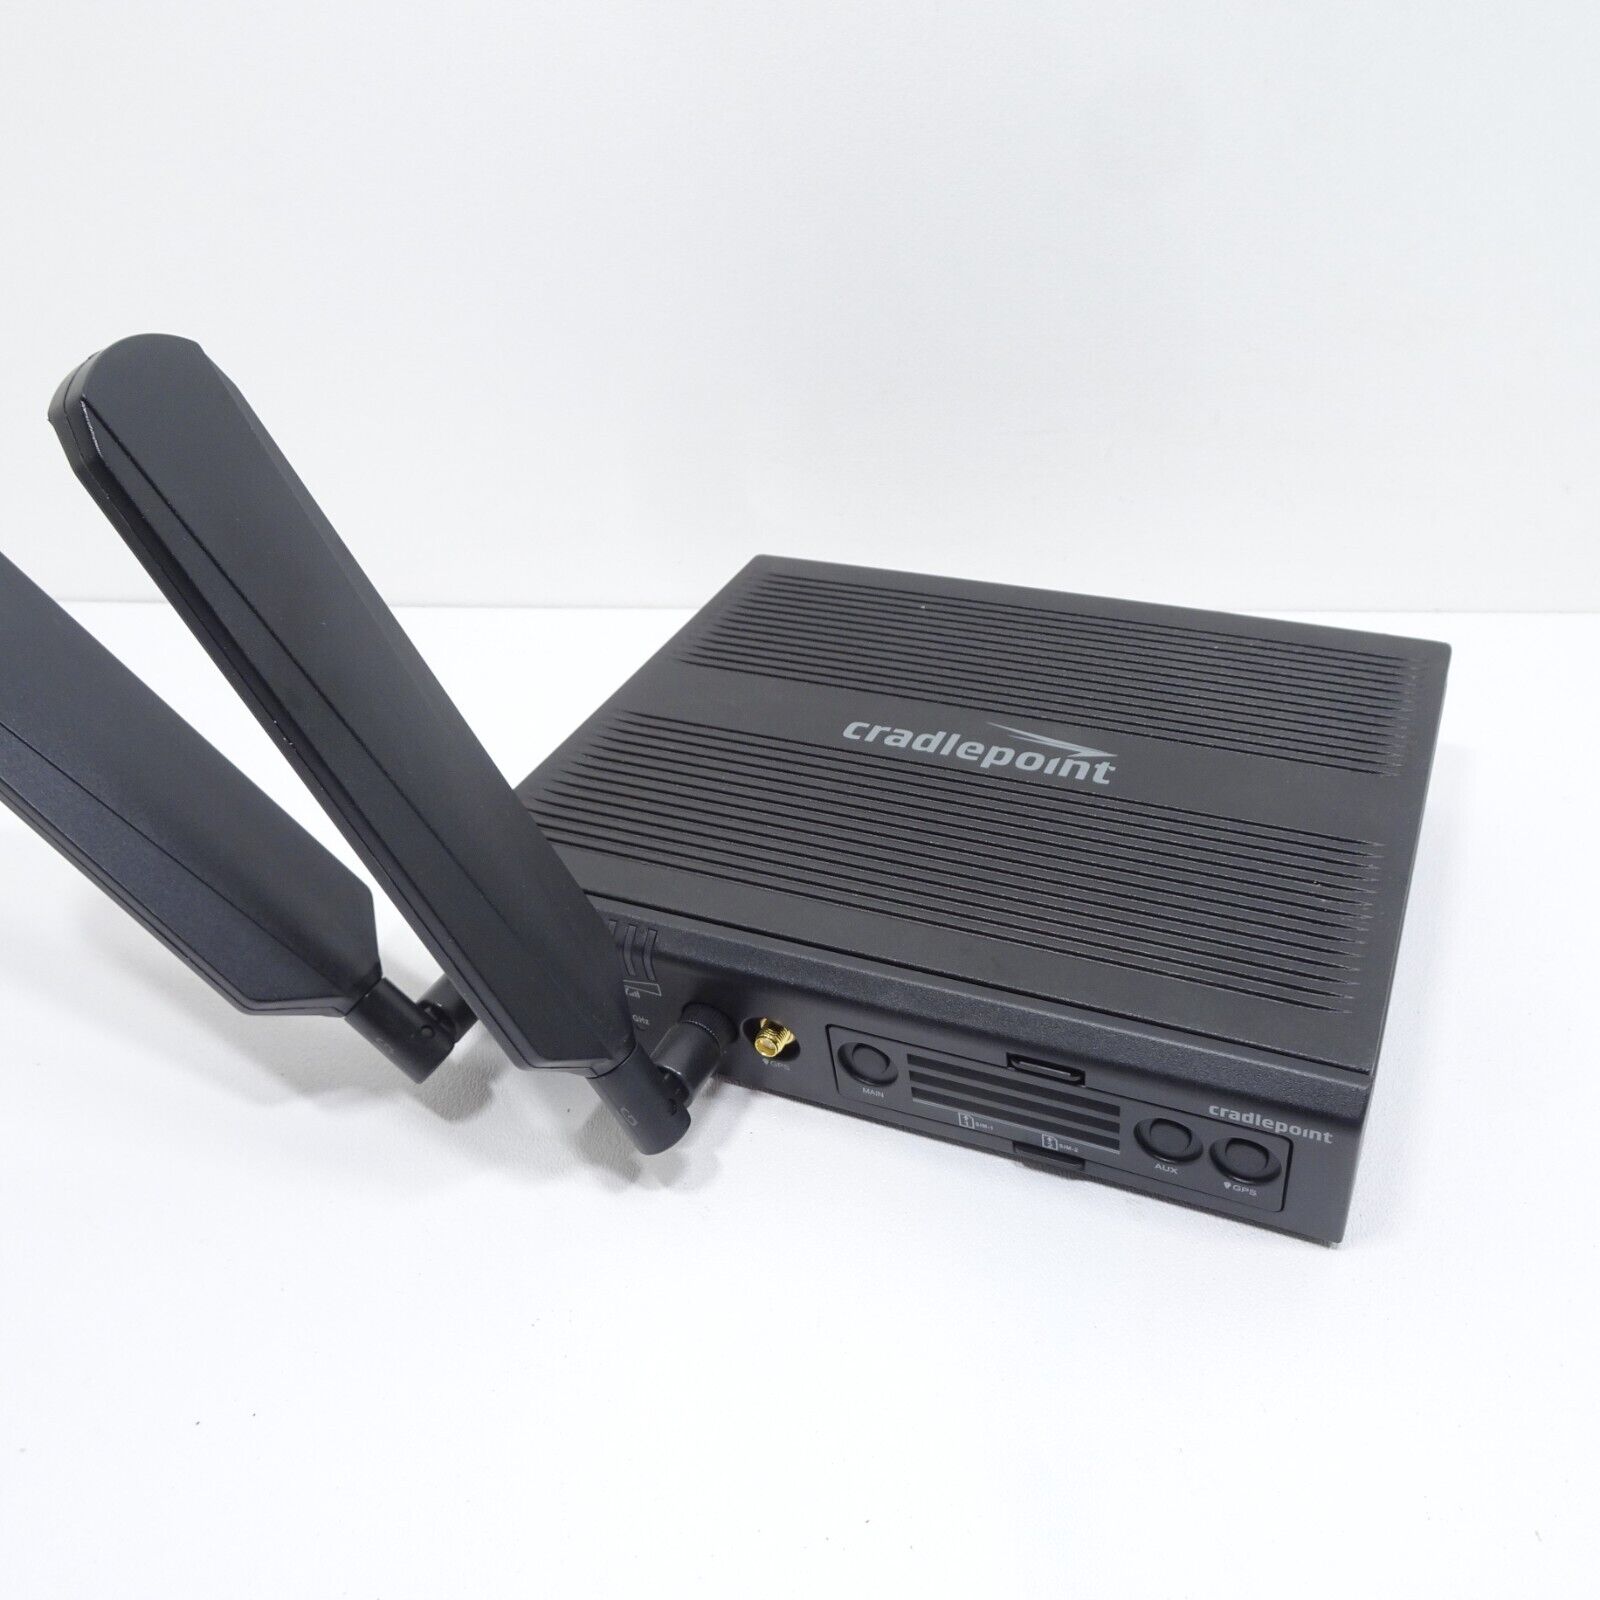 Cradlepoint AER2200 1000 Mbps Wireless Router Only